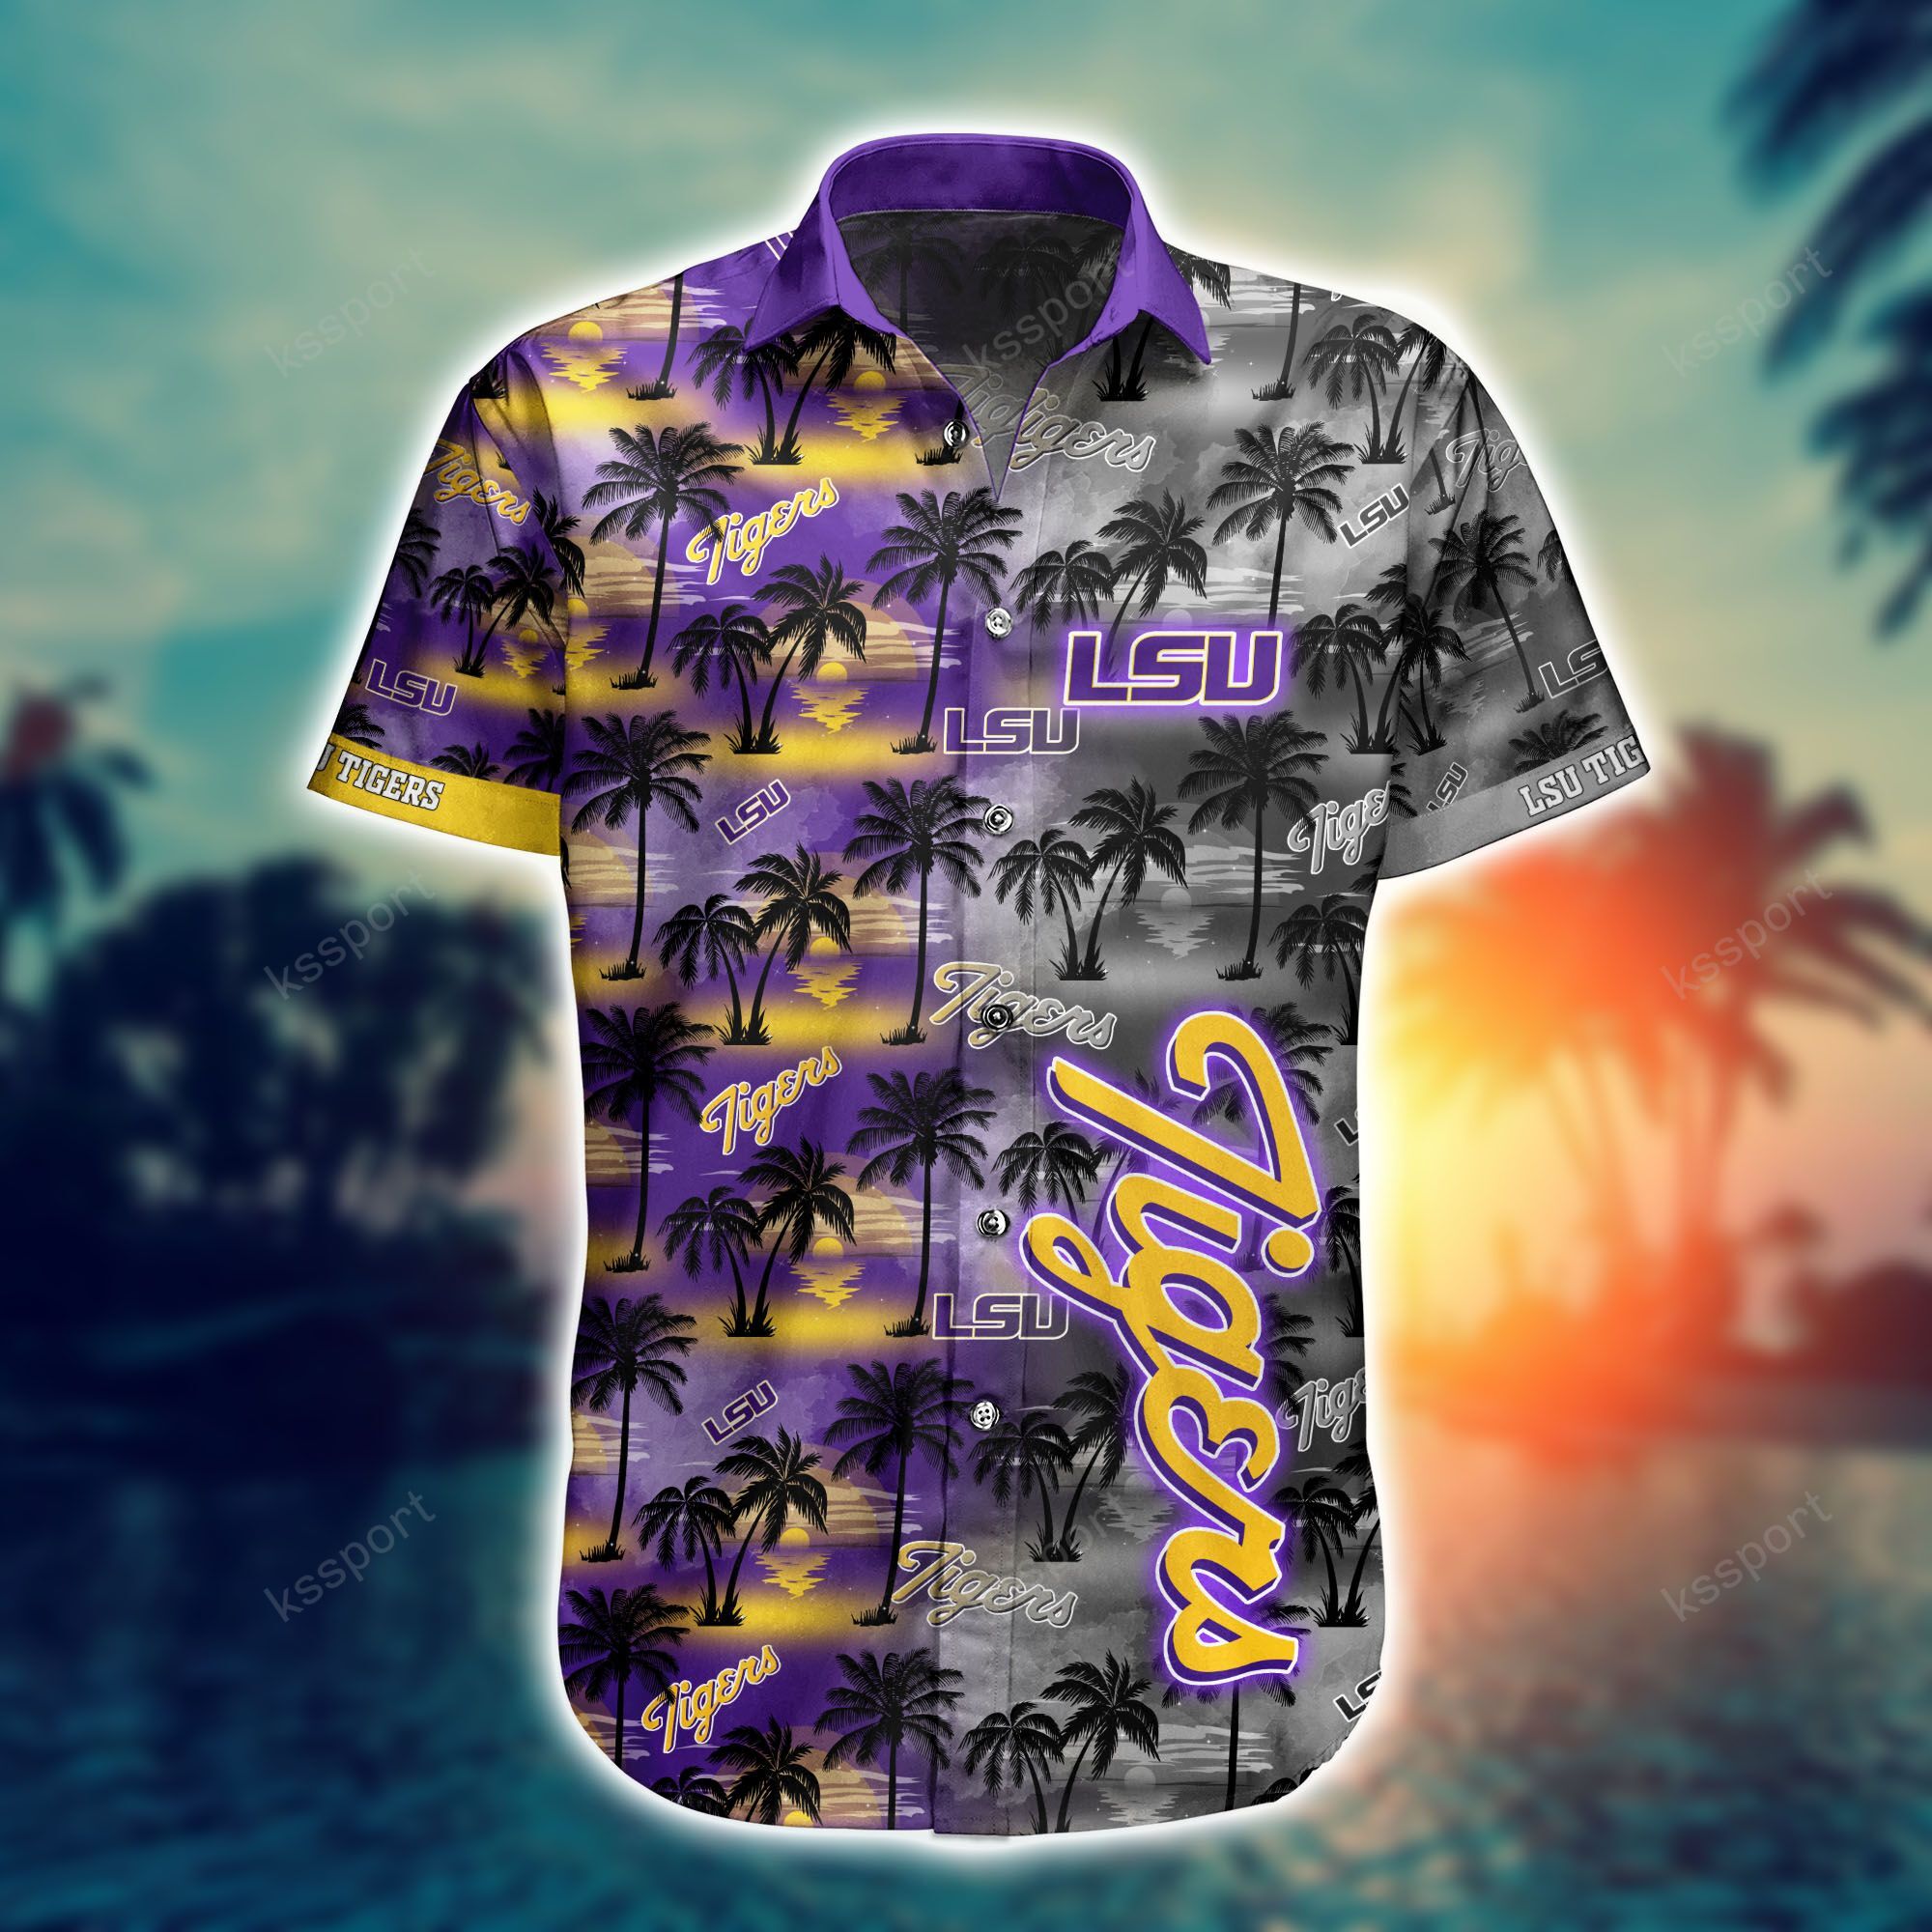 Top cool Hawaiian shirt 2022 - Make sure you get yours today before they run out! 144